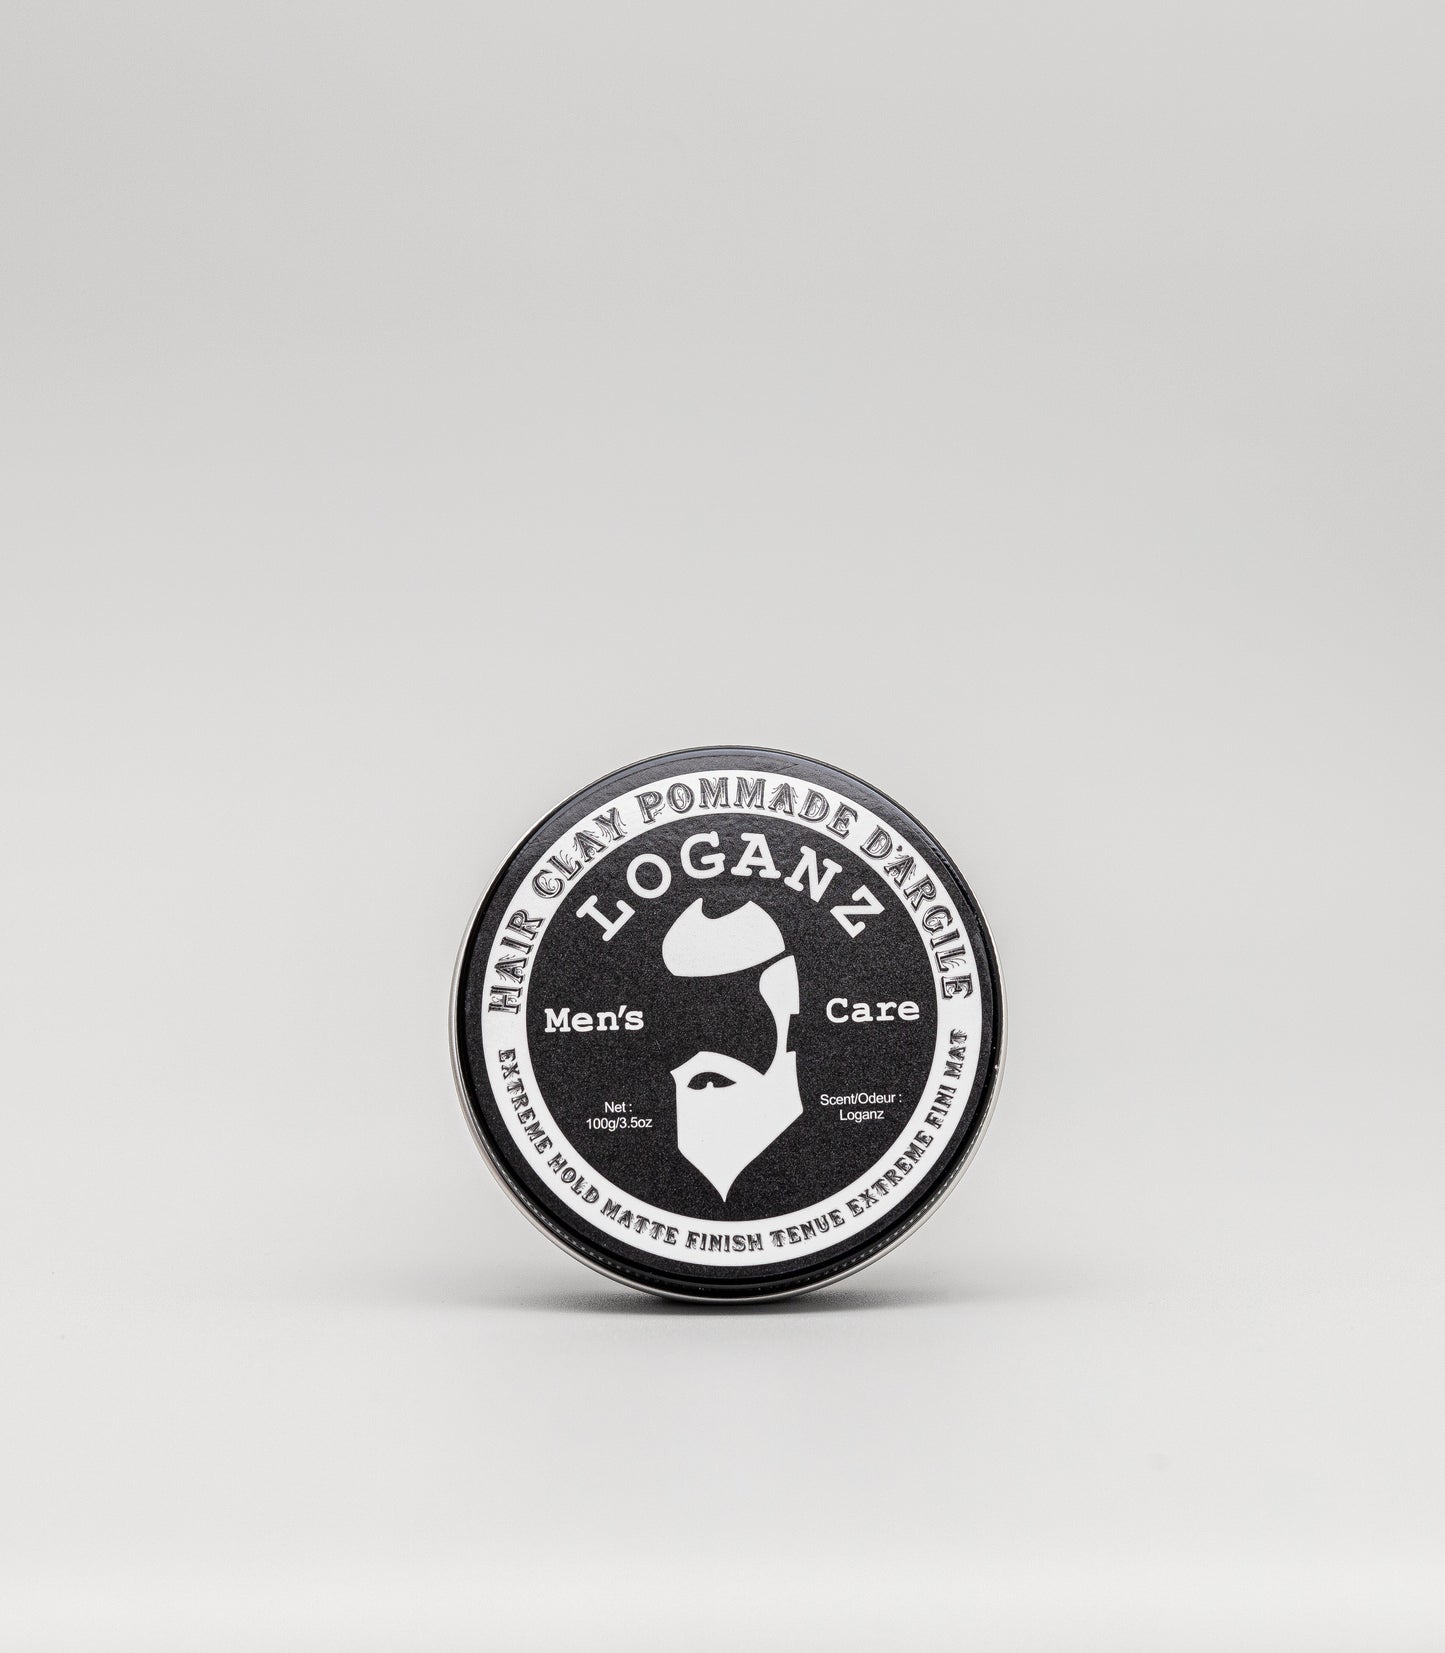 LOGANZ Hair Clay Strong Hold - Non-Greasy/Non-Oily Matte Finish Hair Clay for Men - All Natural Hair Pomade for Hairstyling - 3.5 Oz.